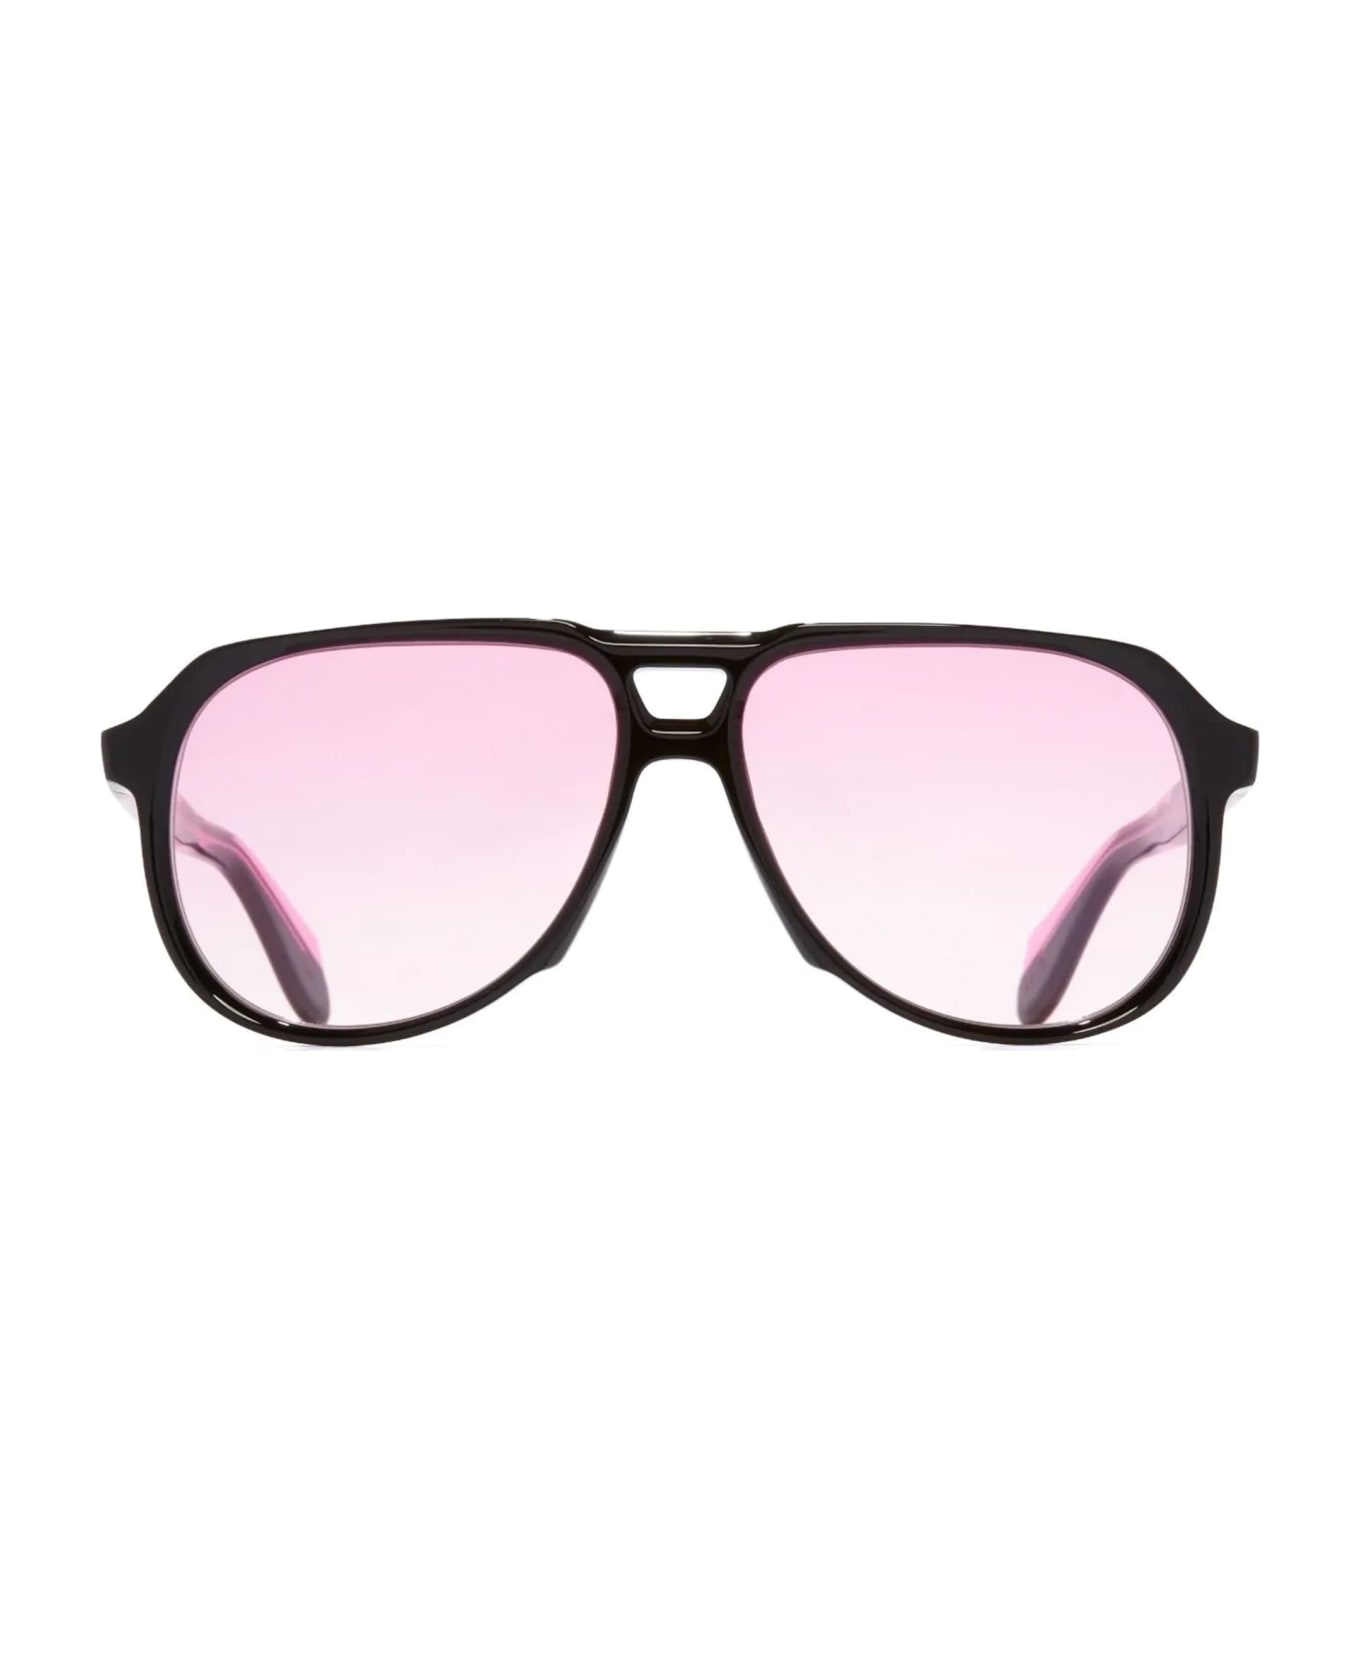 Cutler and Gross 9782 / Black On Pink Sunglasses - black/pink